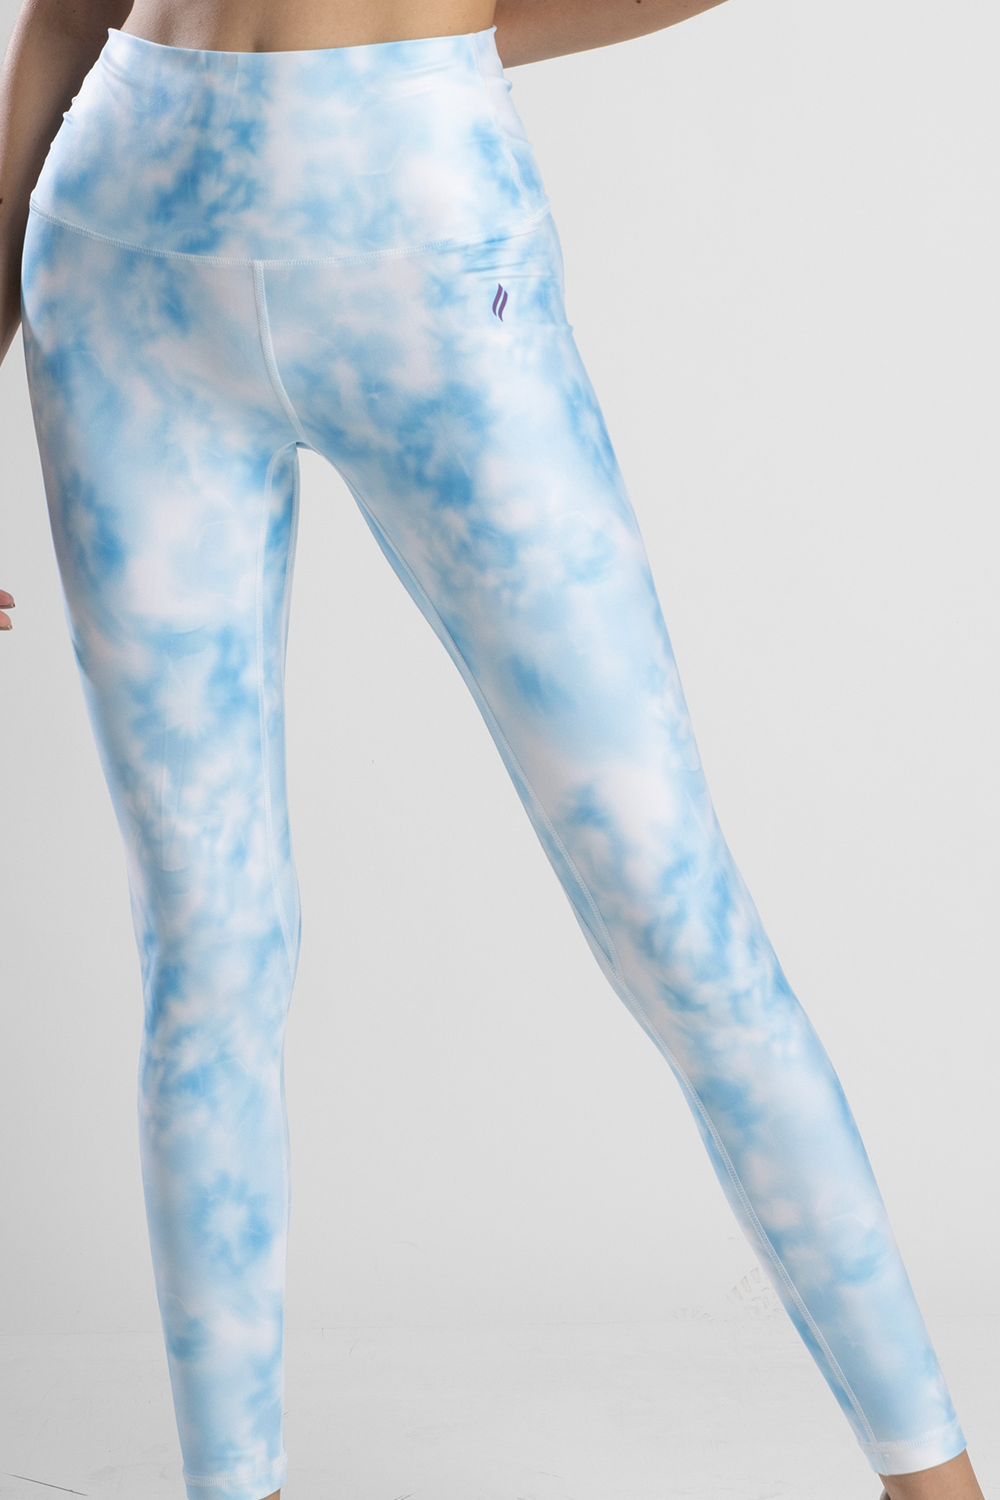 Women Tie Dye Gym Sports Pants Custom Soft Sexsy Yoga Legging Manufacturer  Supplier from Unnao India